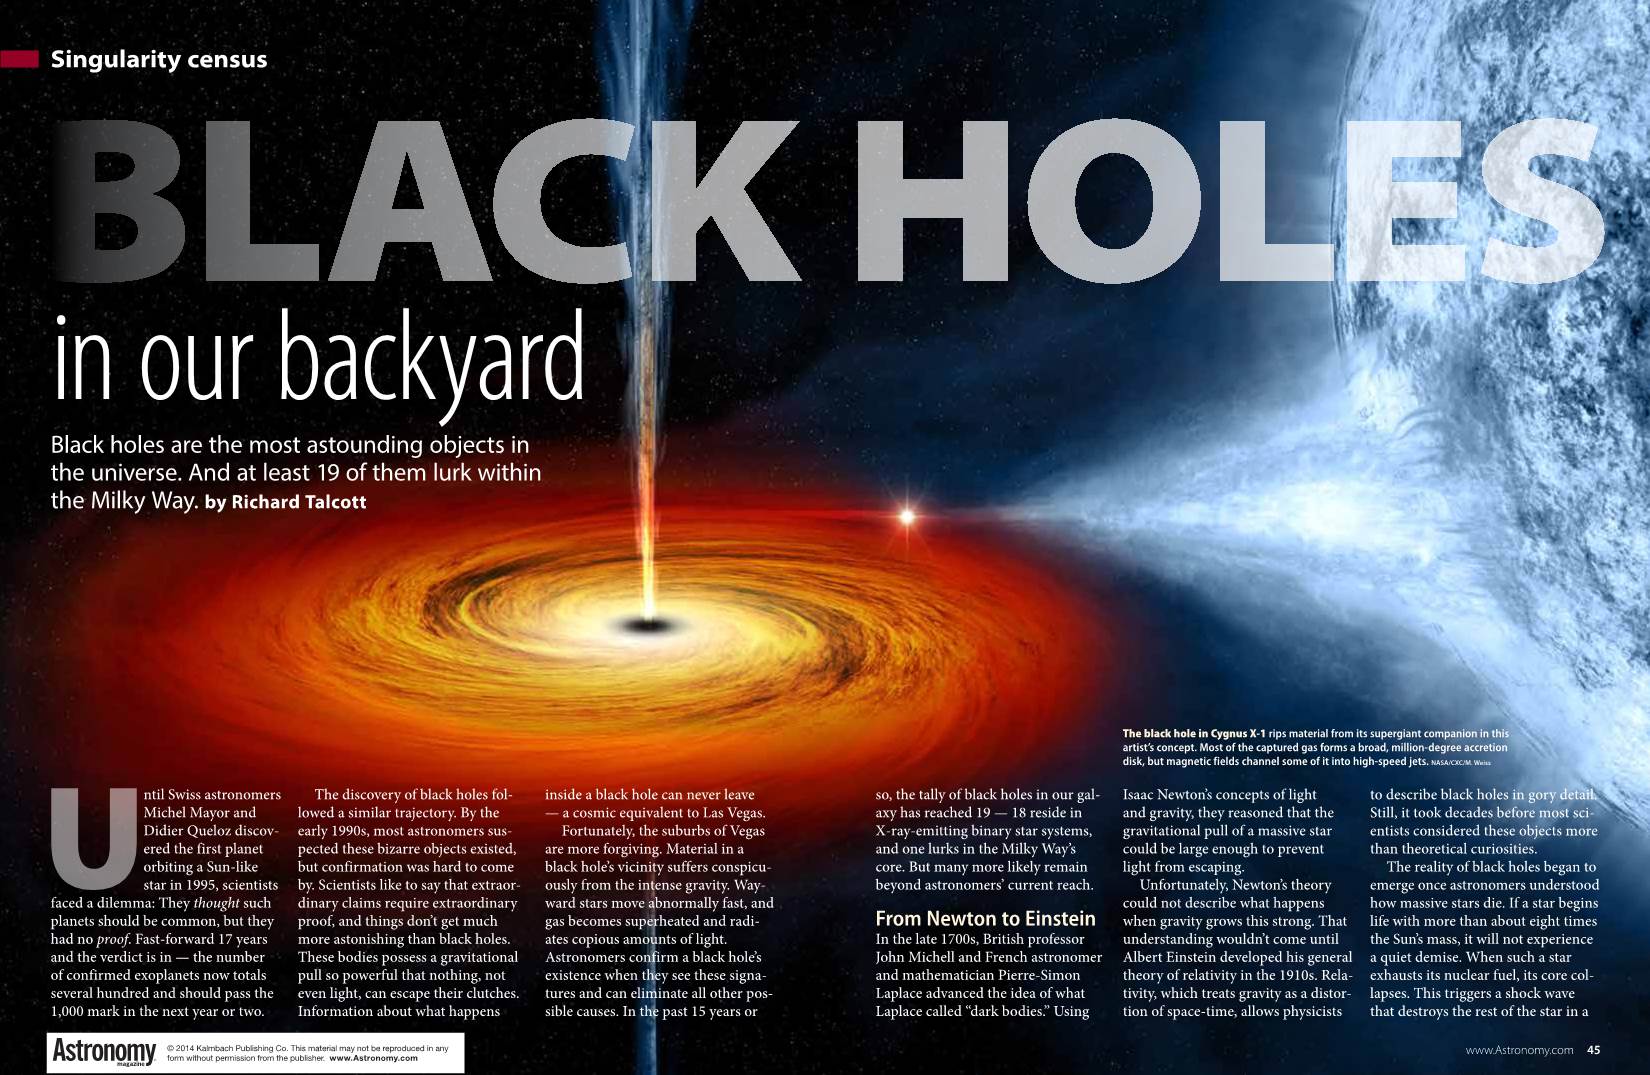 Black Holes Are the Most Astounding Objects in the Universe. and at Least 19 of Them Lurk Within the Milky Way